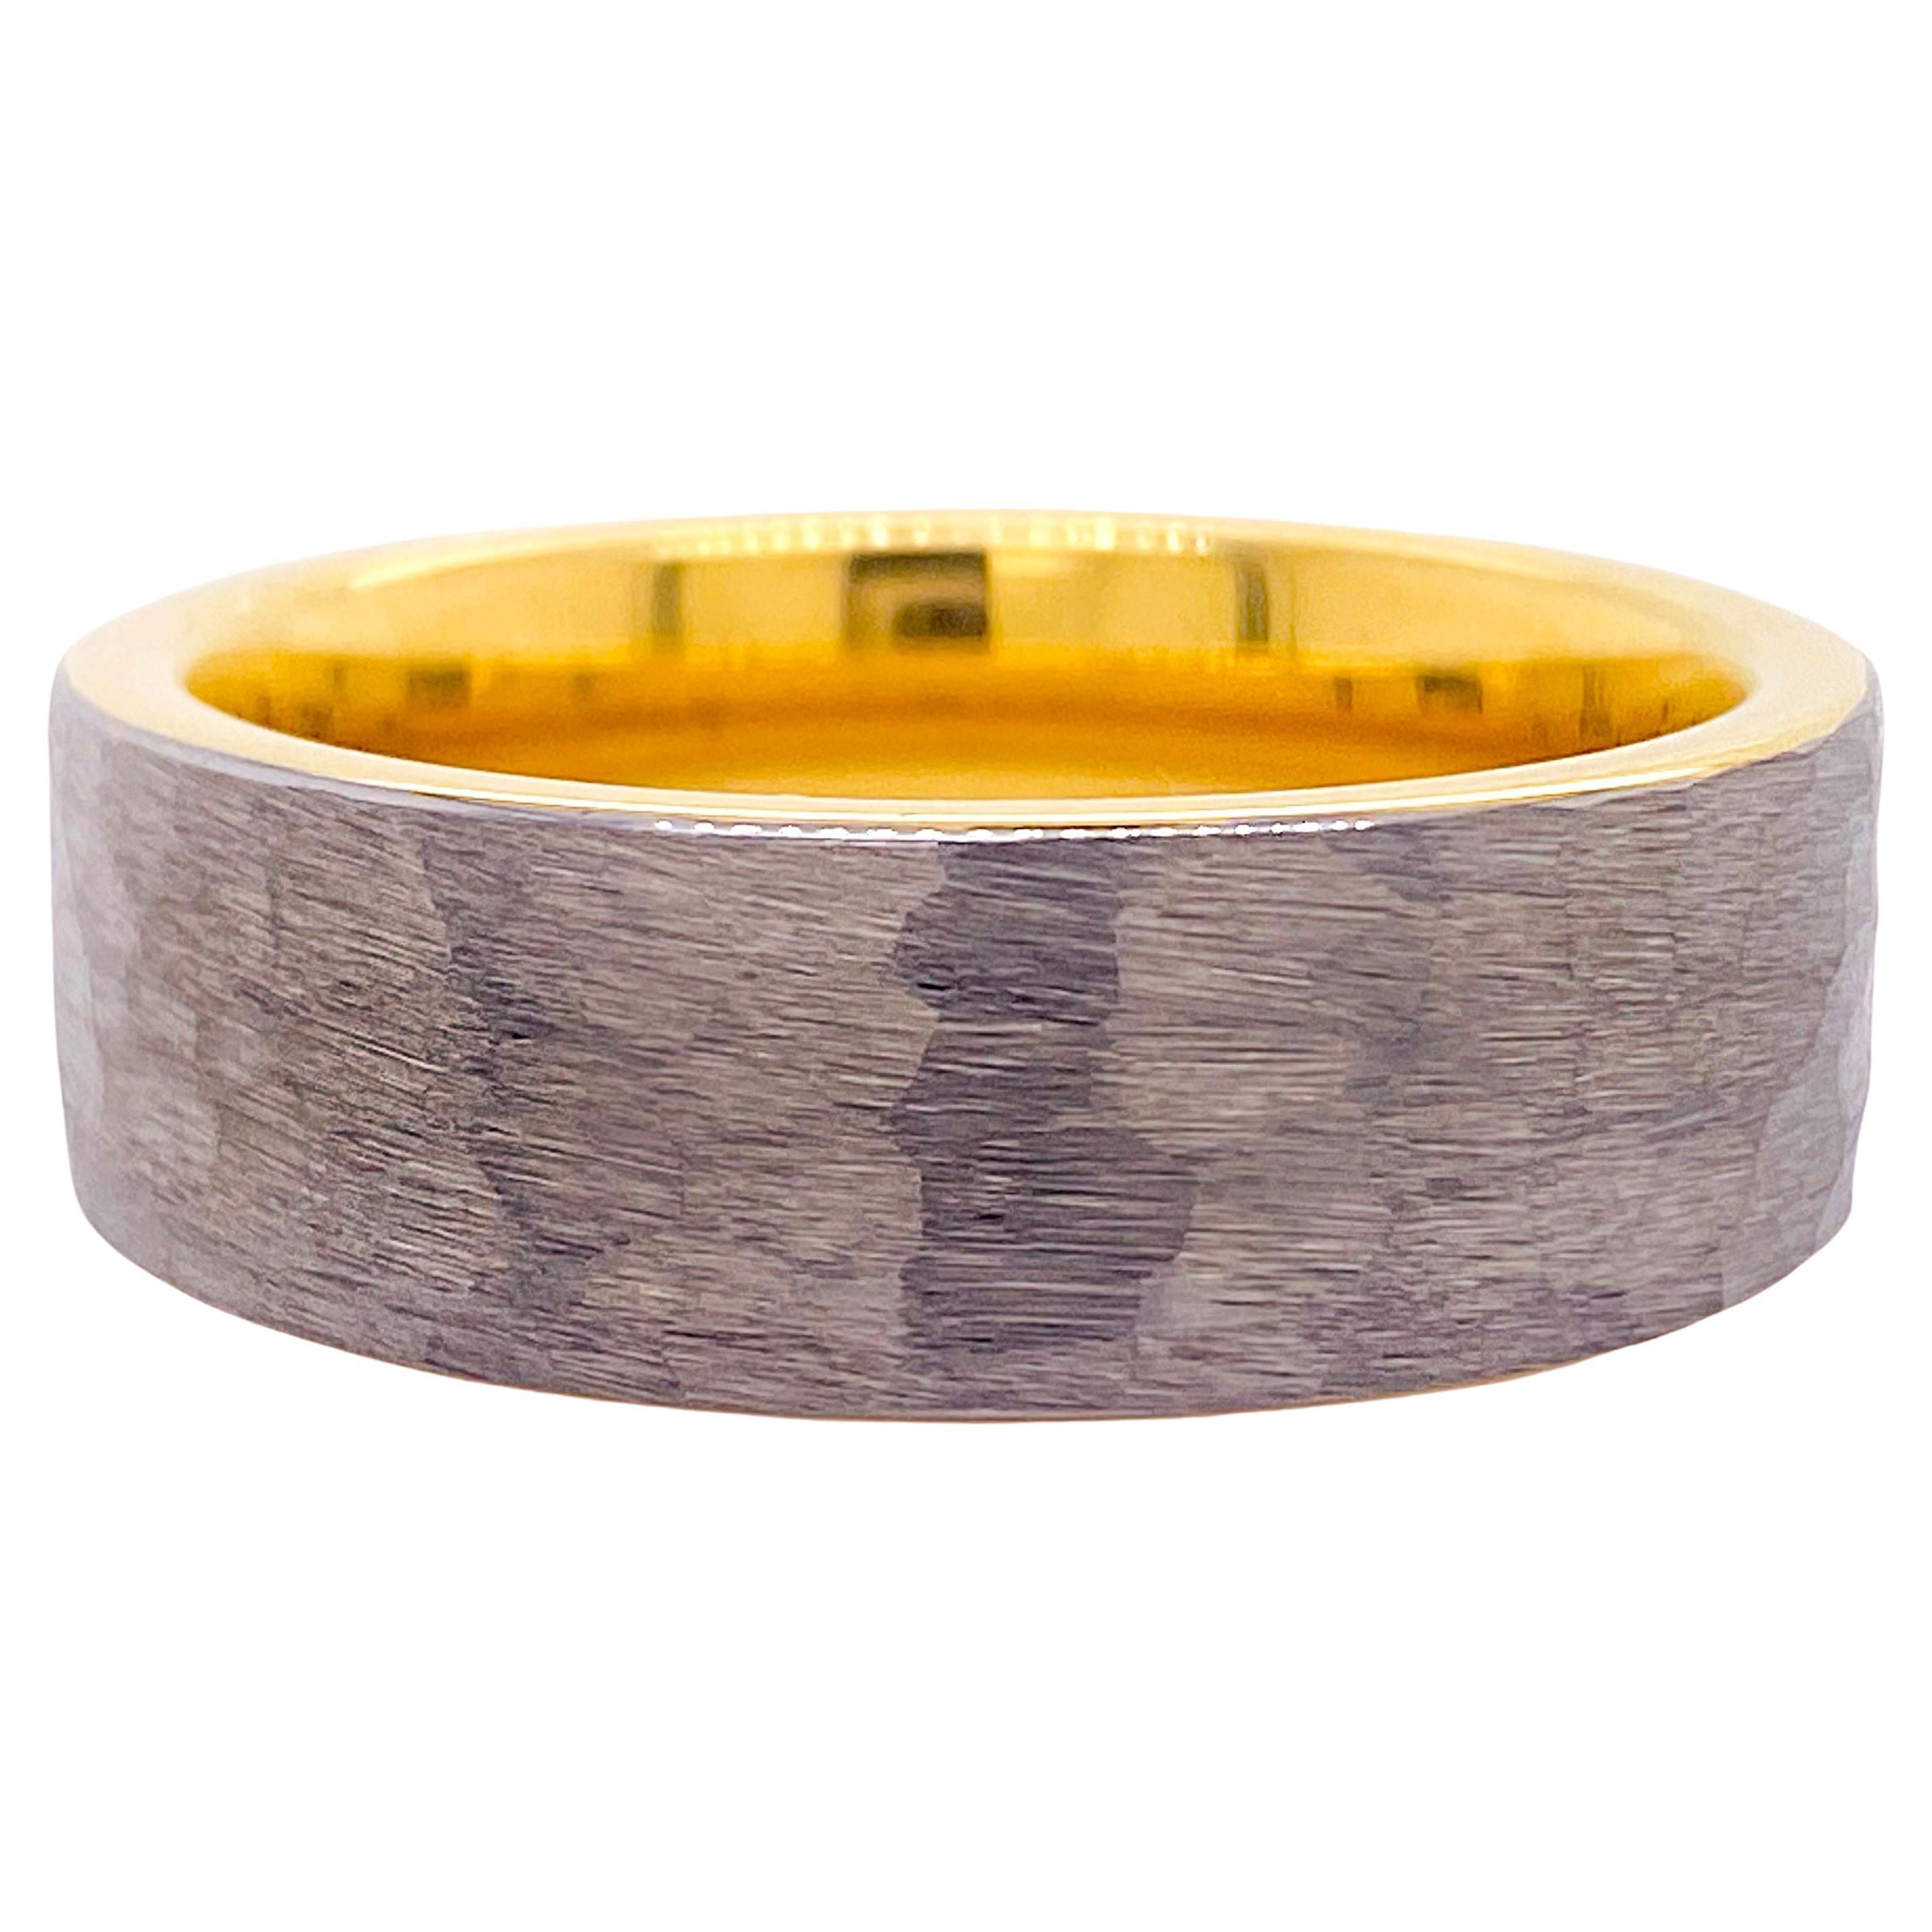 For Sale:  Men's Wedding Band w Gray and Gold Hammered PVD 18k